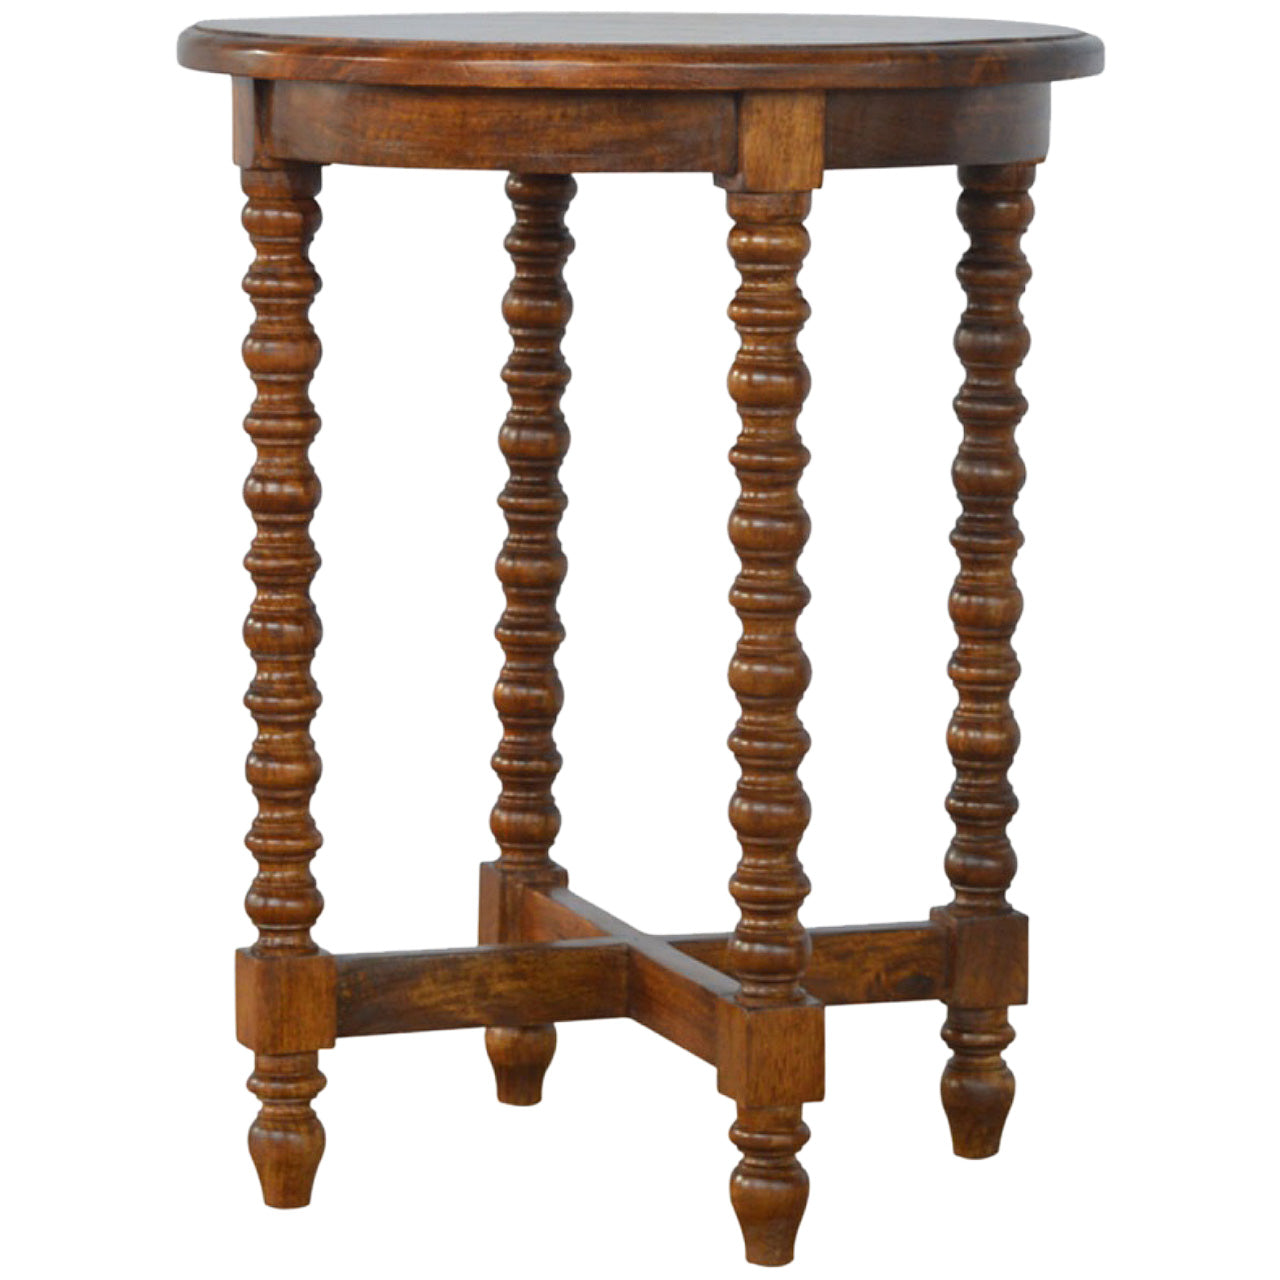 View Mango Wood Small Round Tea Table information